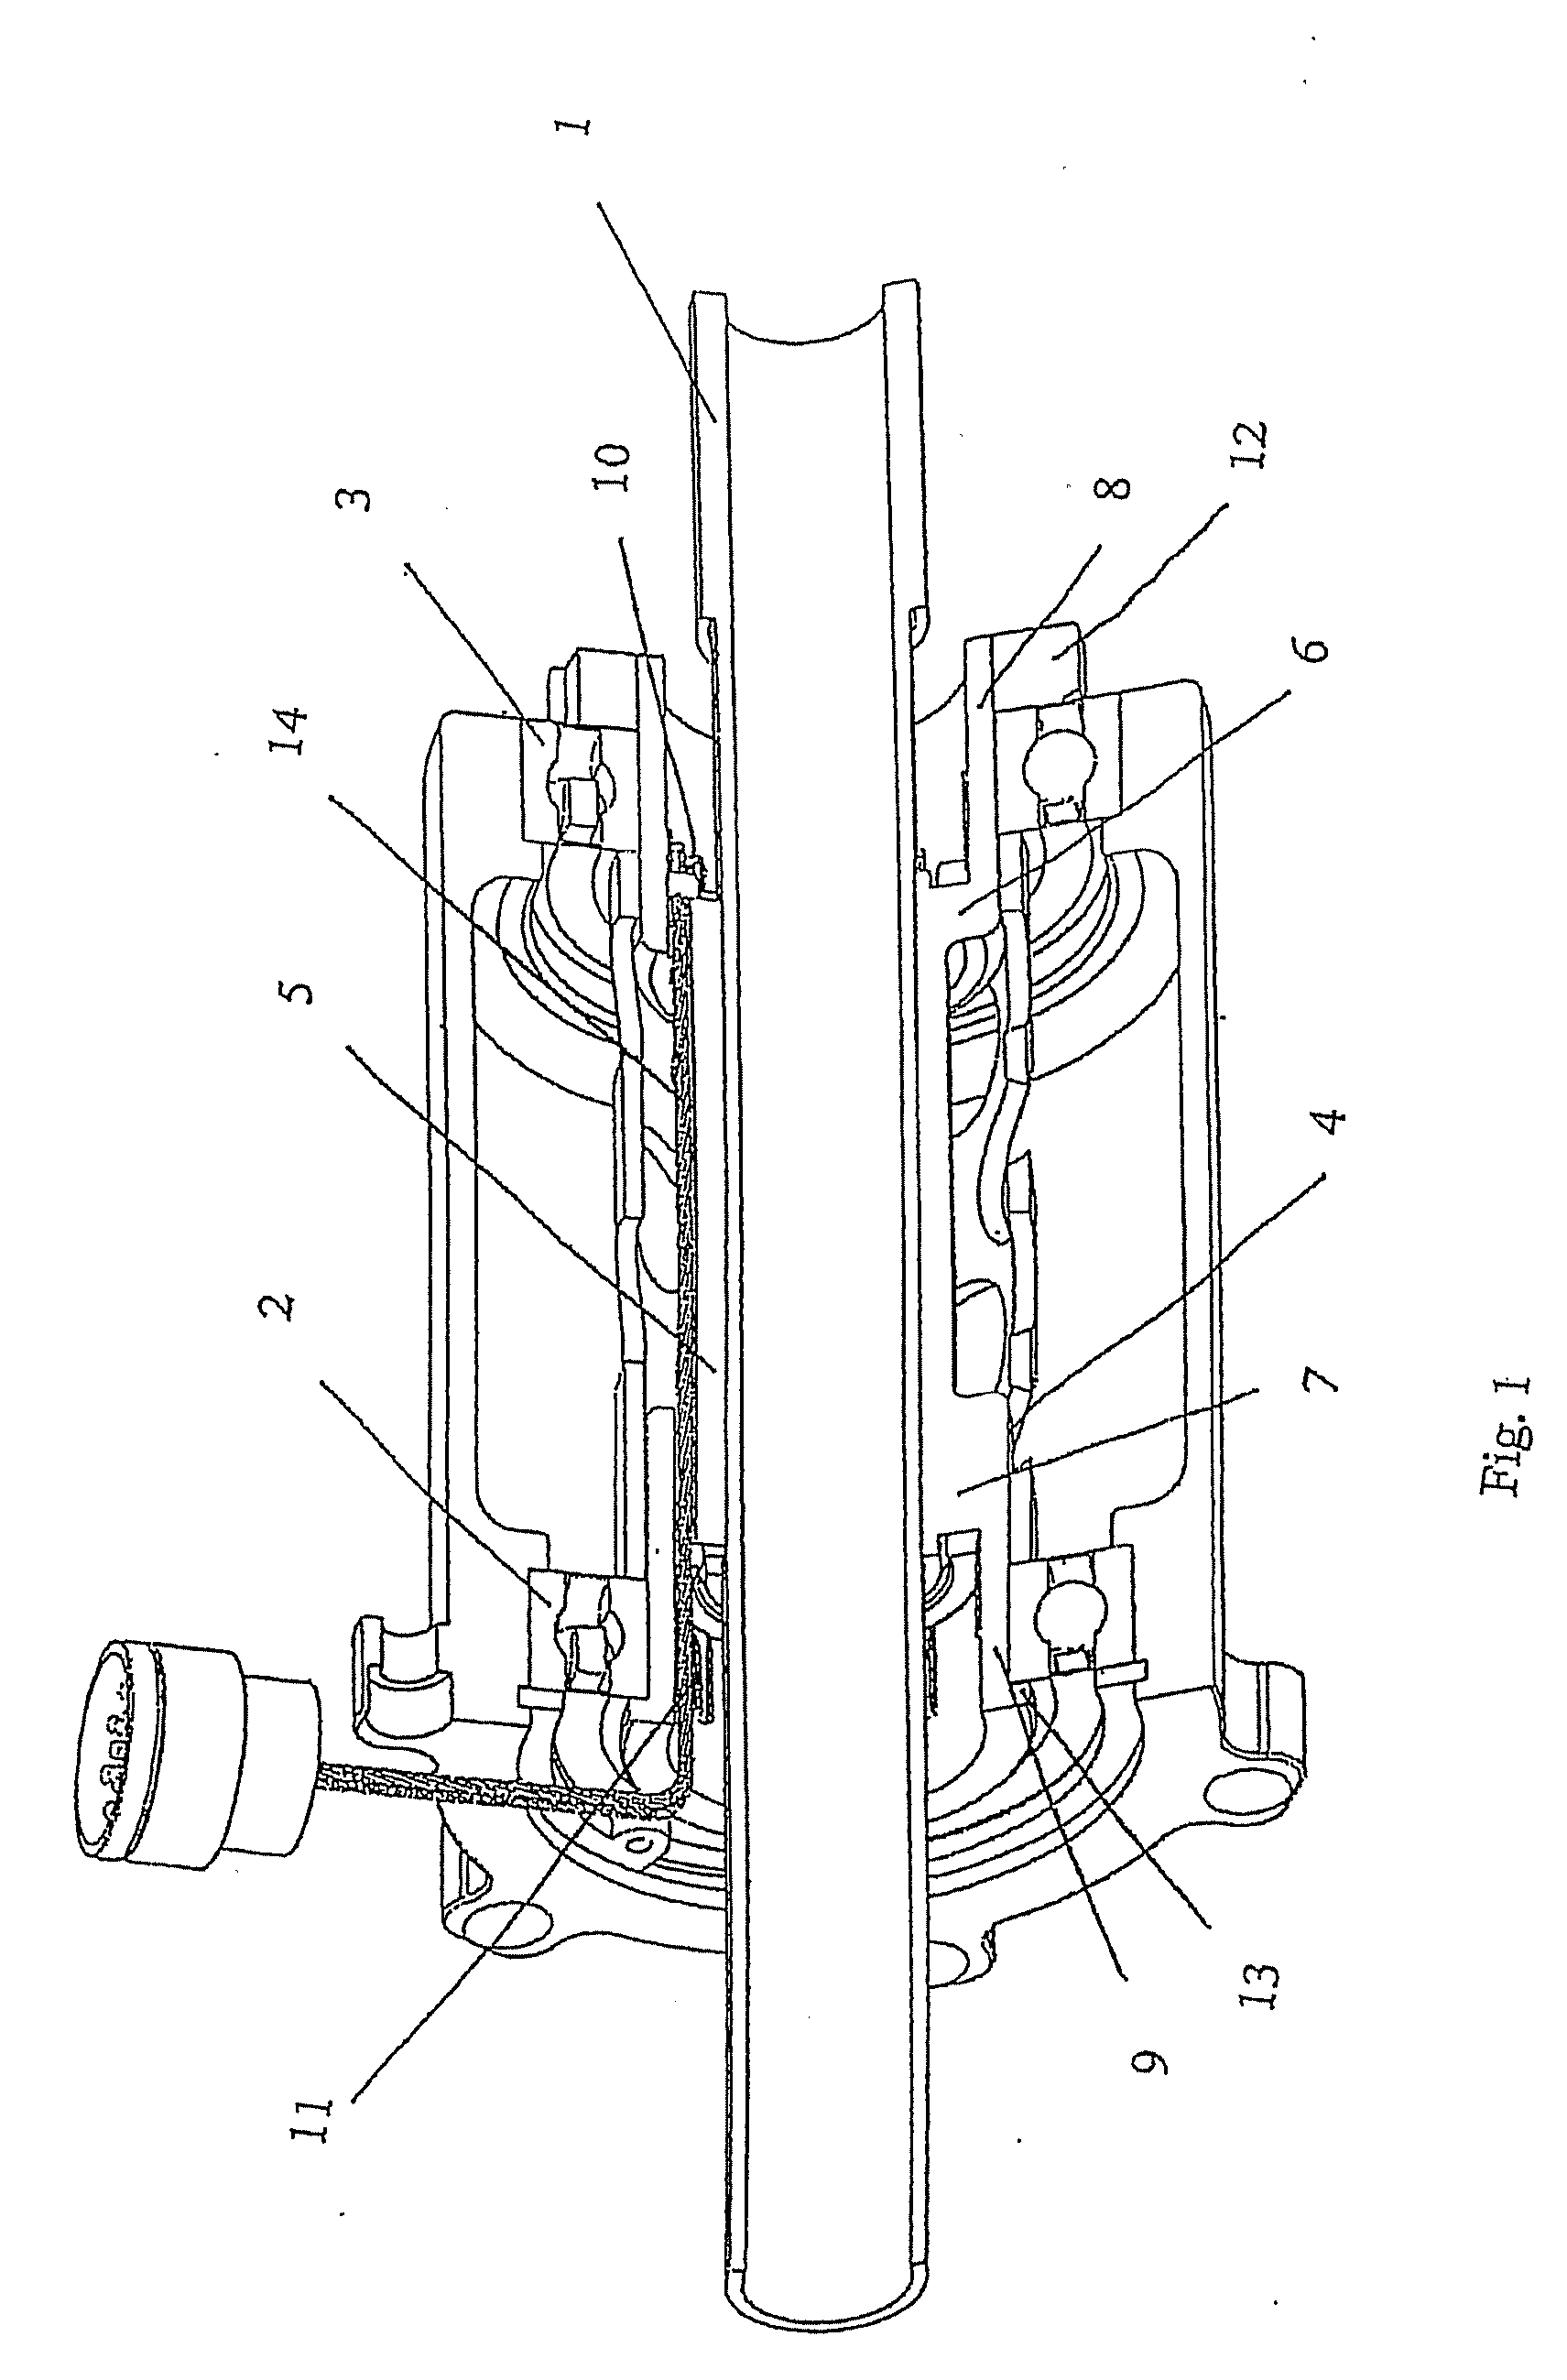 Bearing Assembly with a Strain Sensor